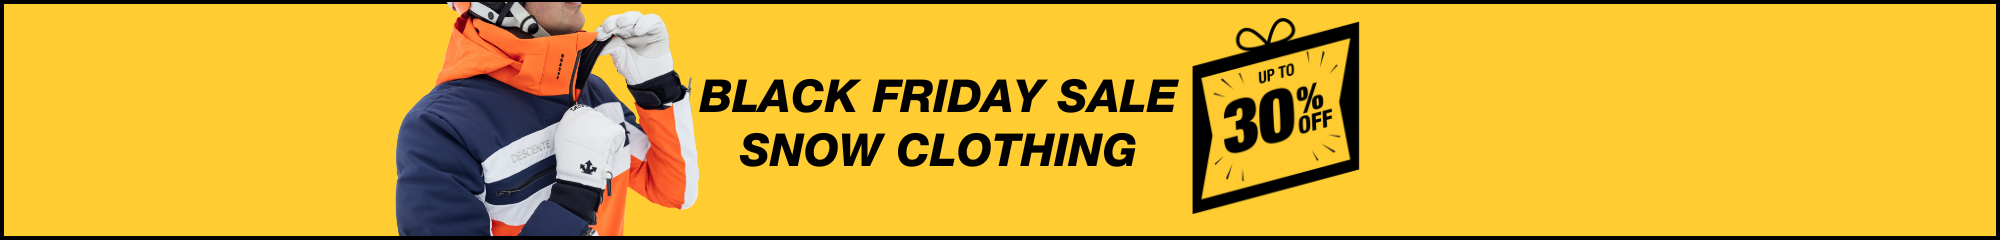 Black Friday Deals on Snow Clothing